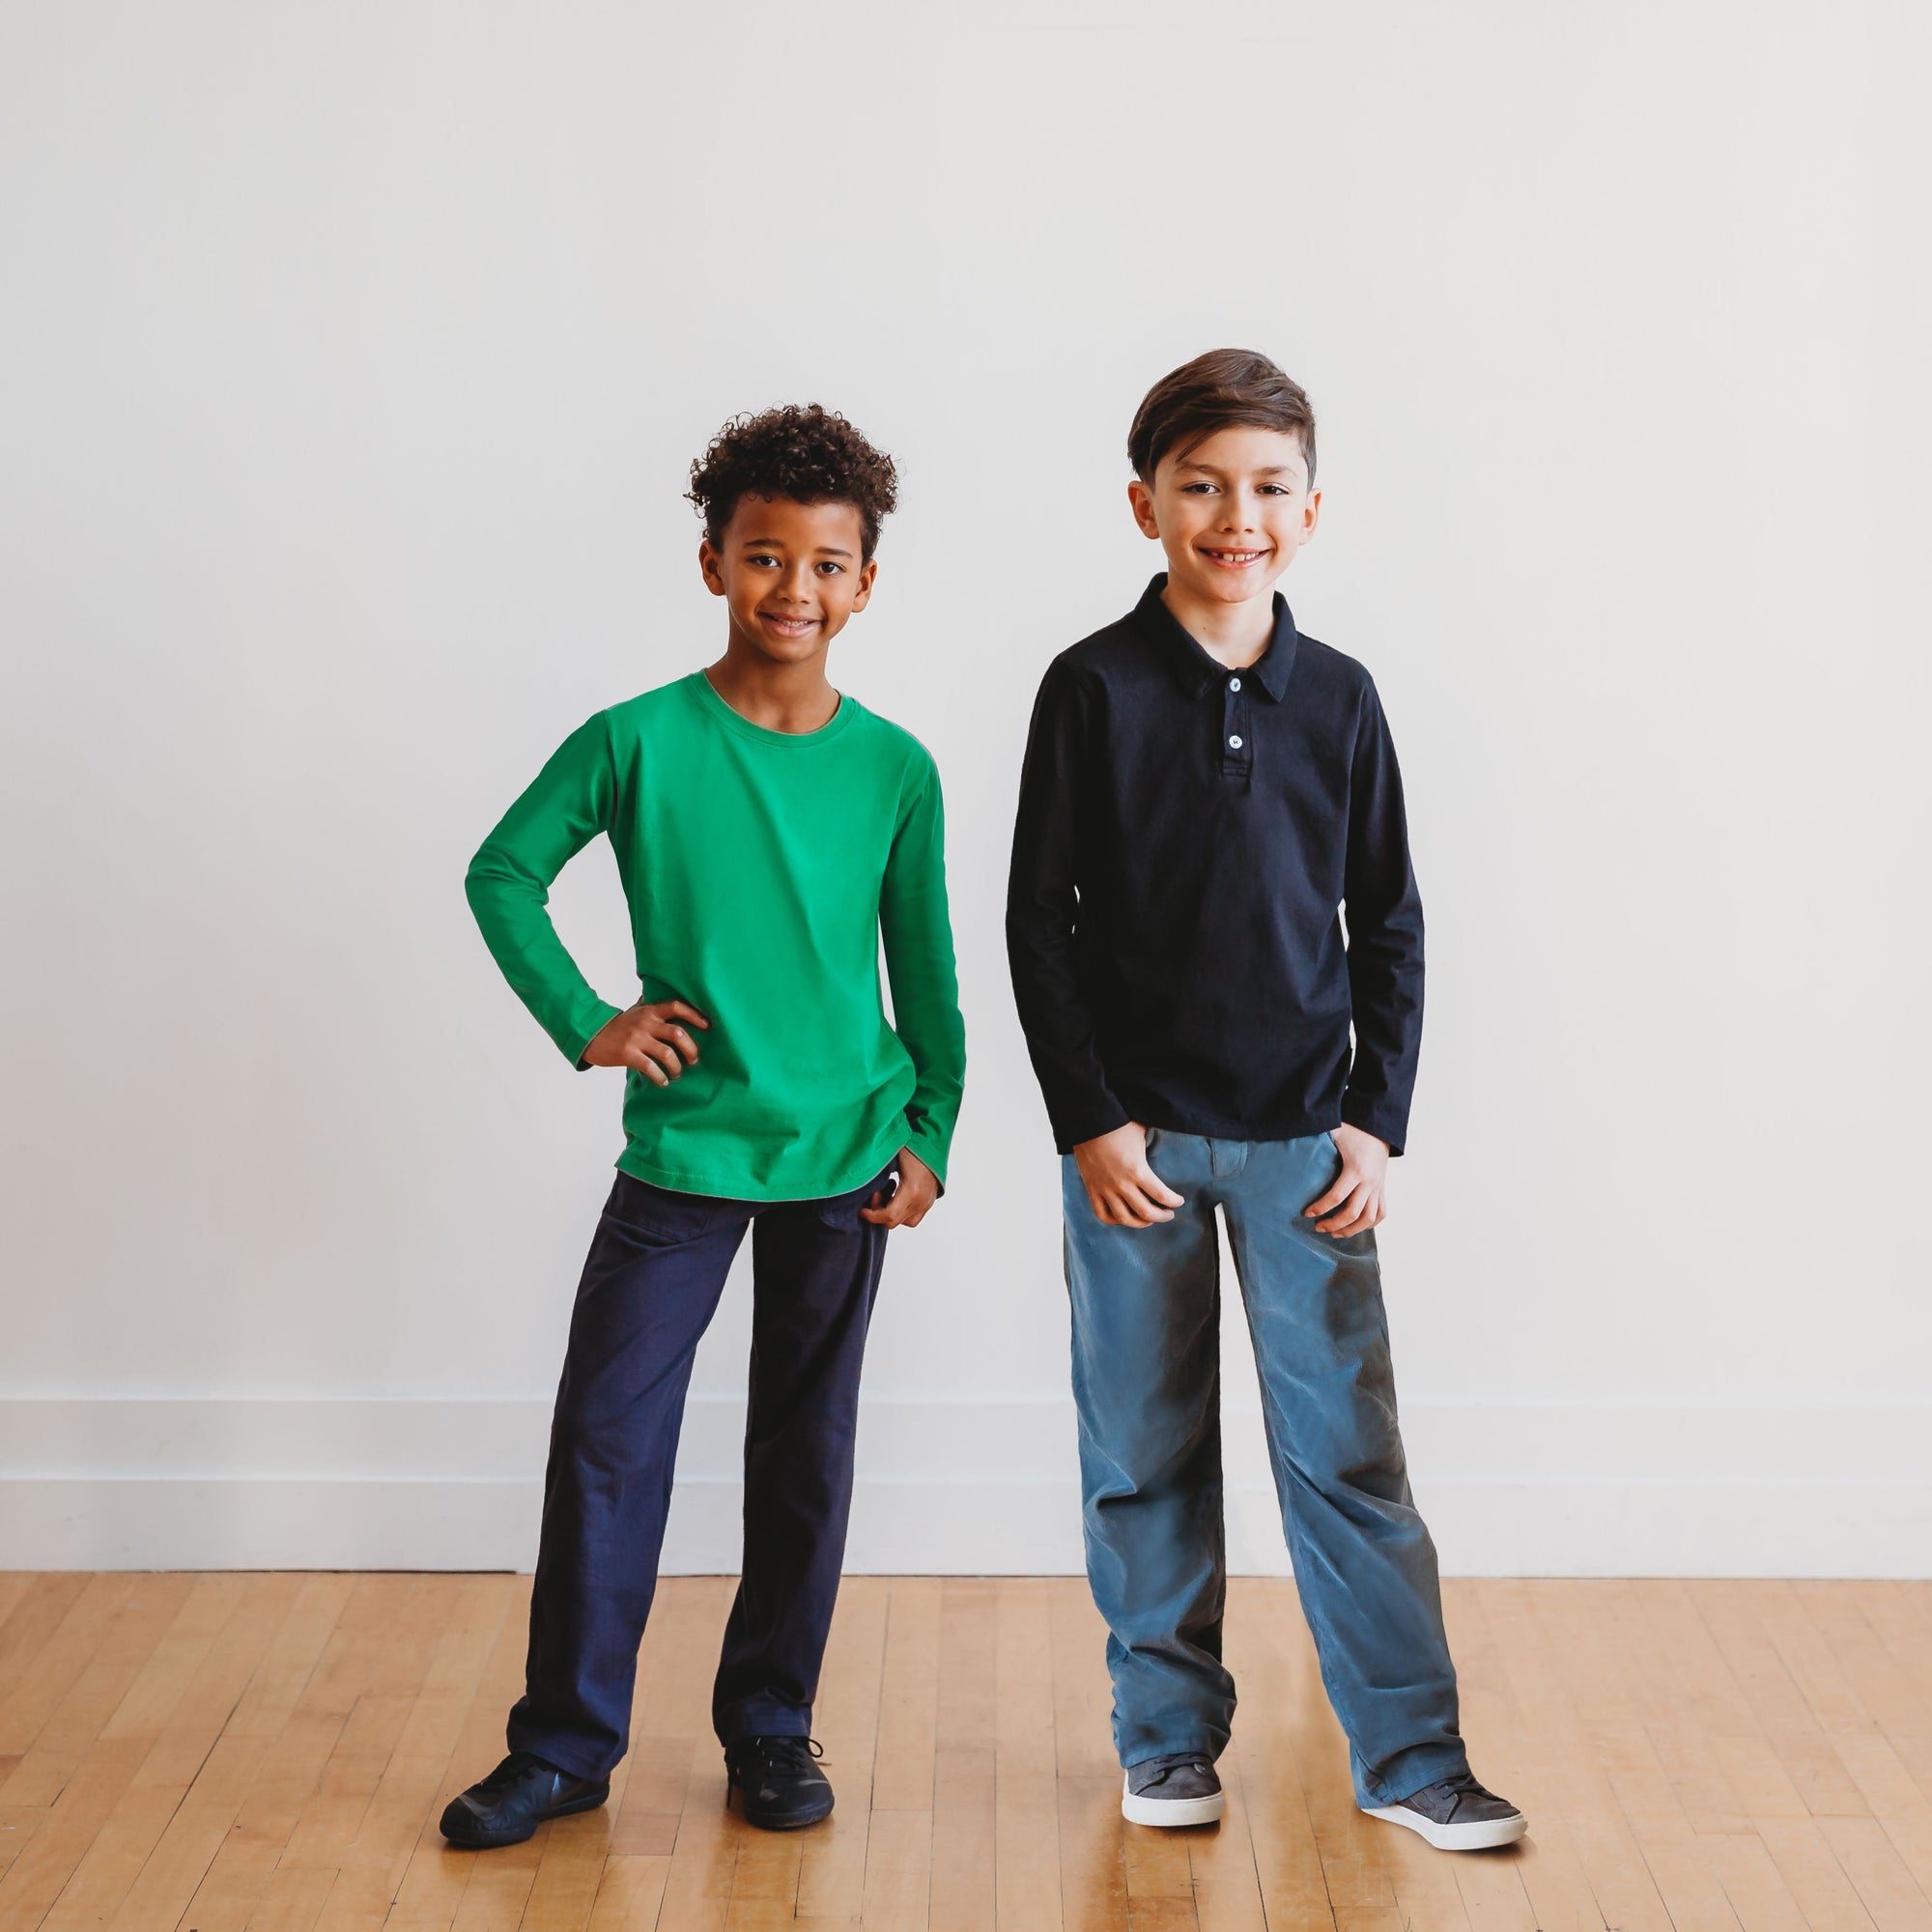 Boys Cotton T-Shirts made in the USA by City Threads